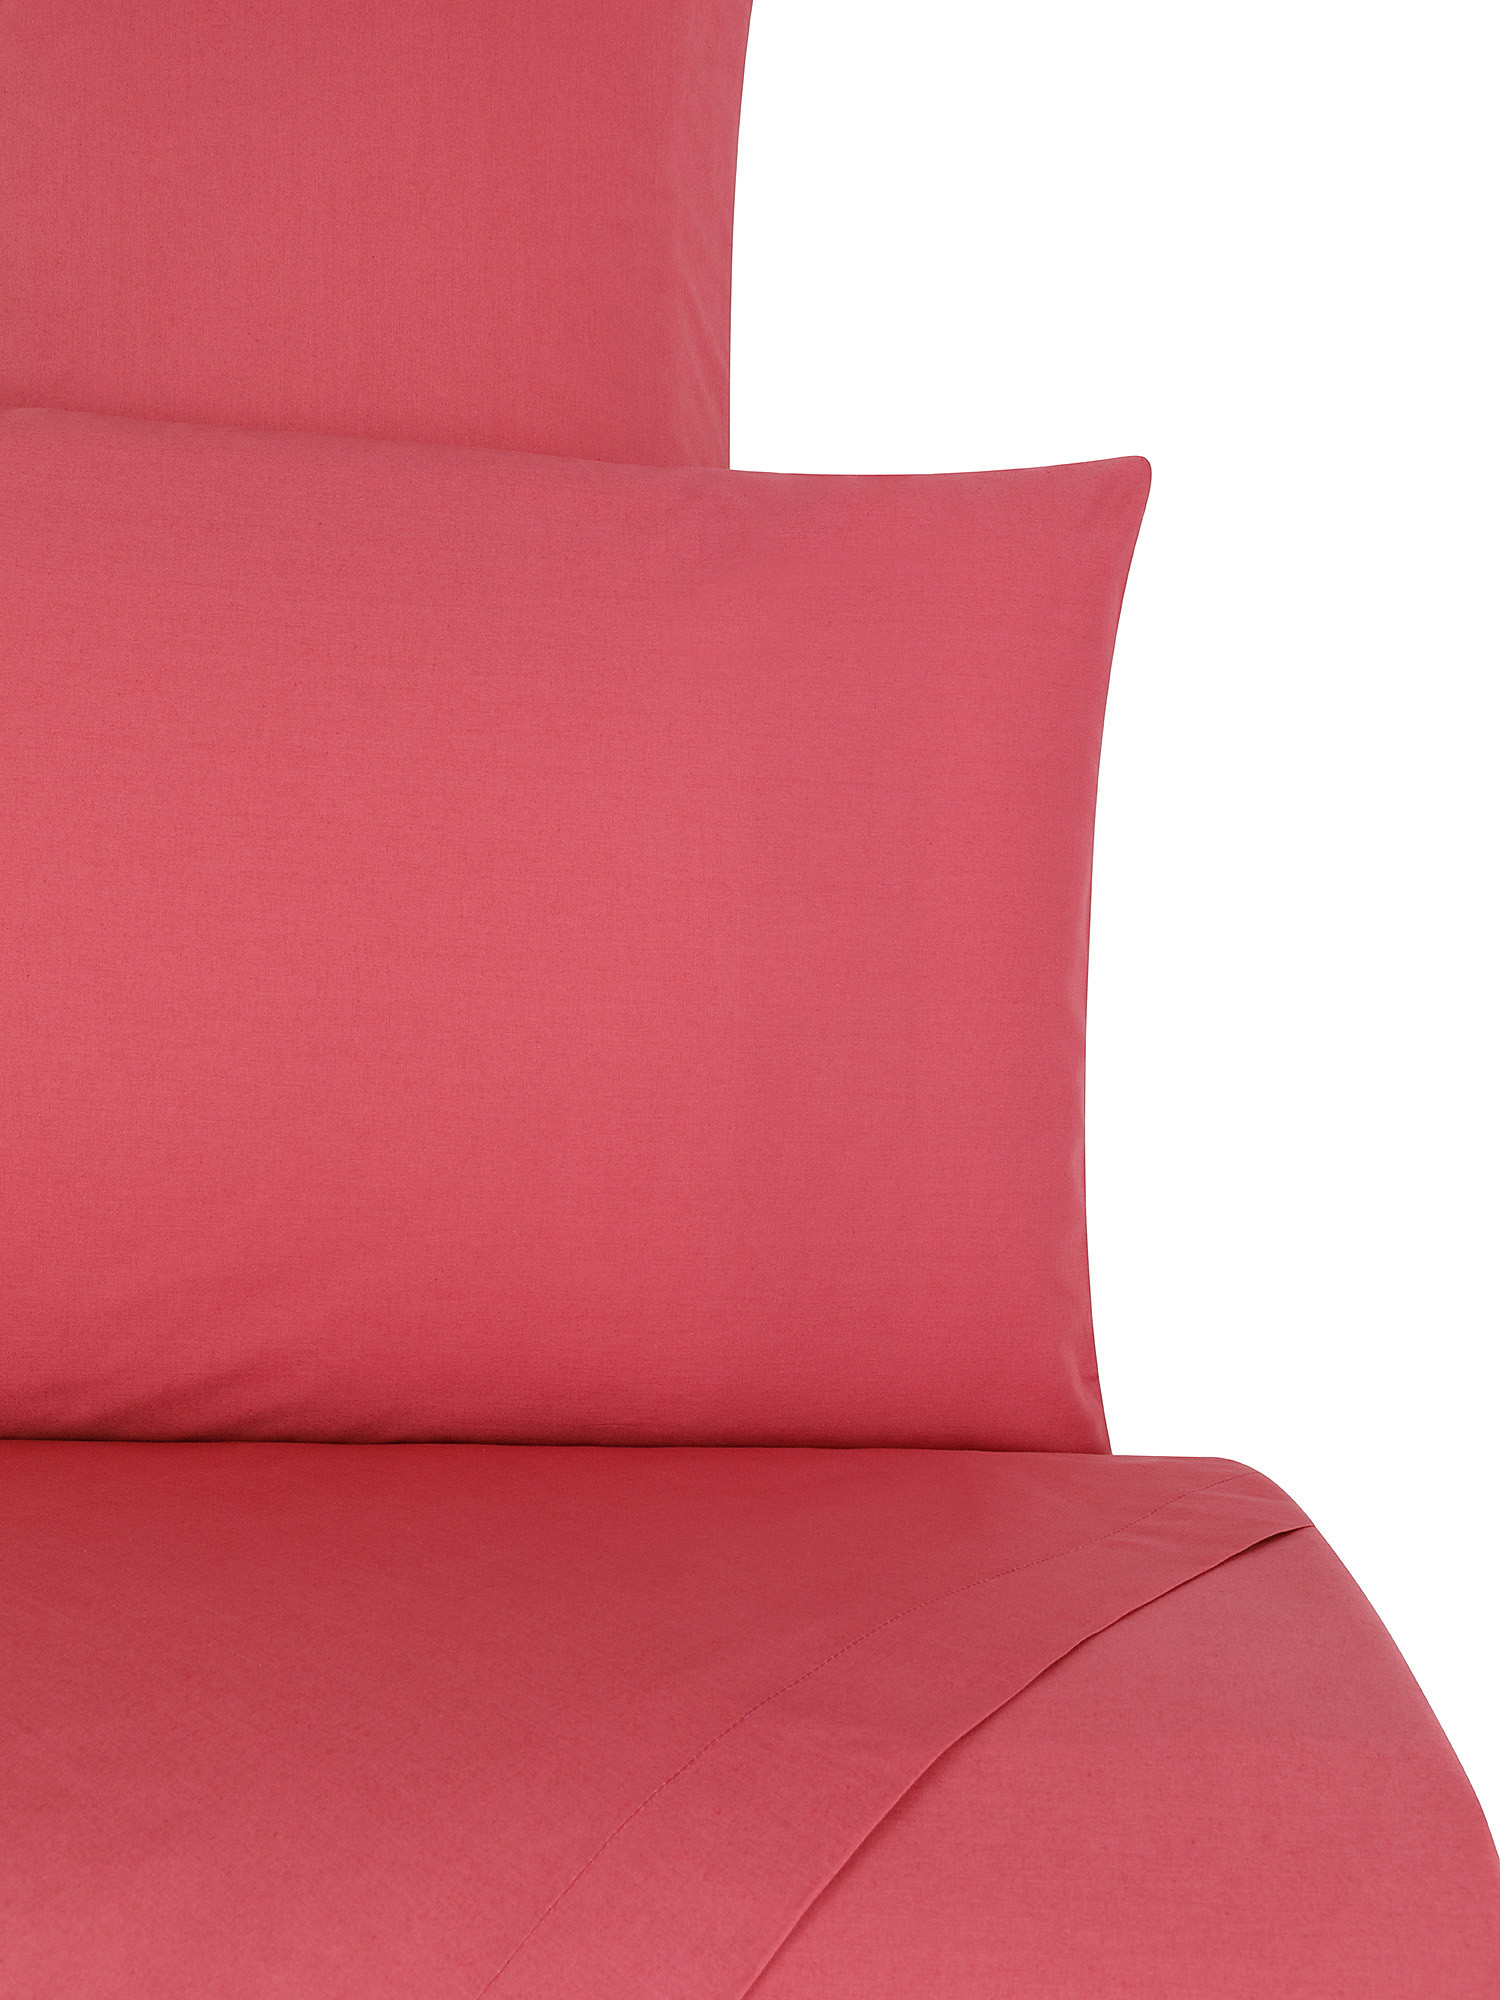 Solid color cotton percale sheet set, Pink, large image number 1